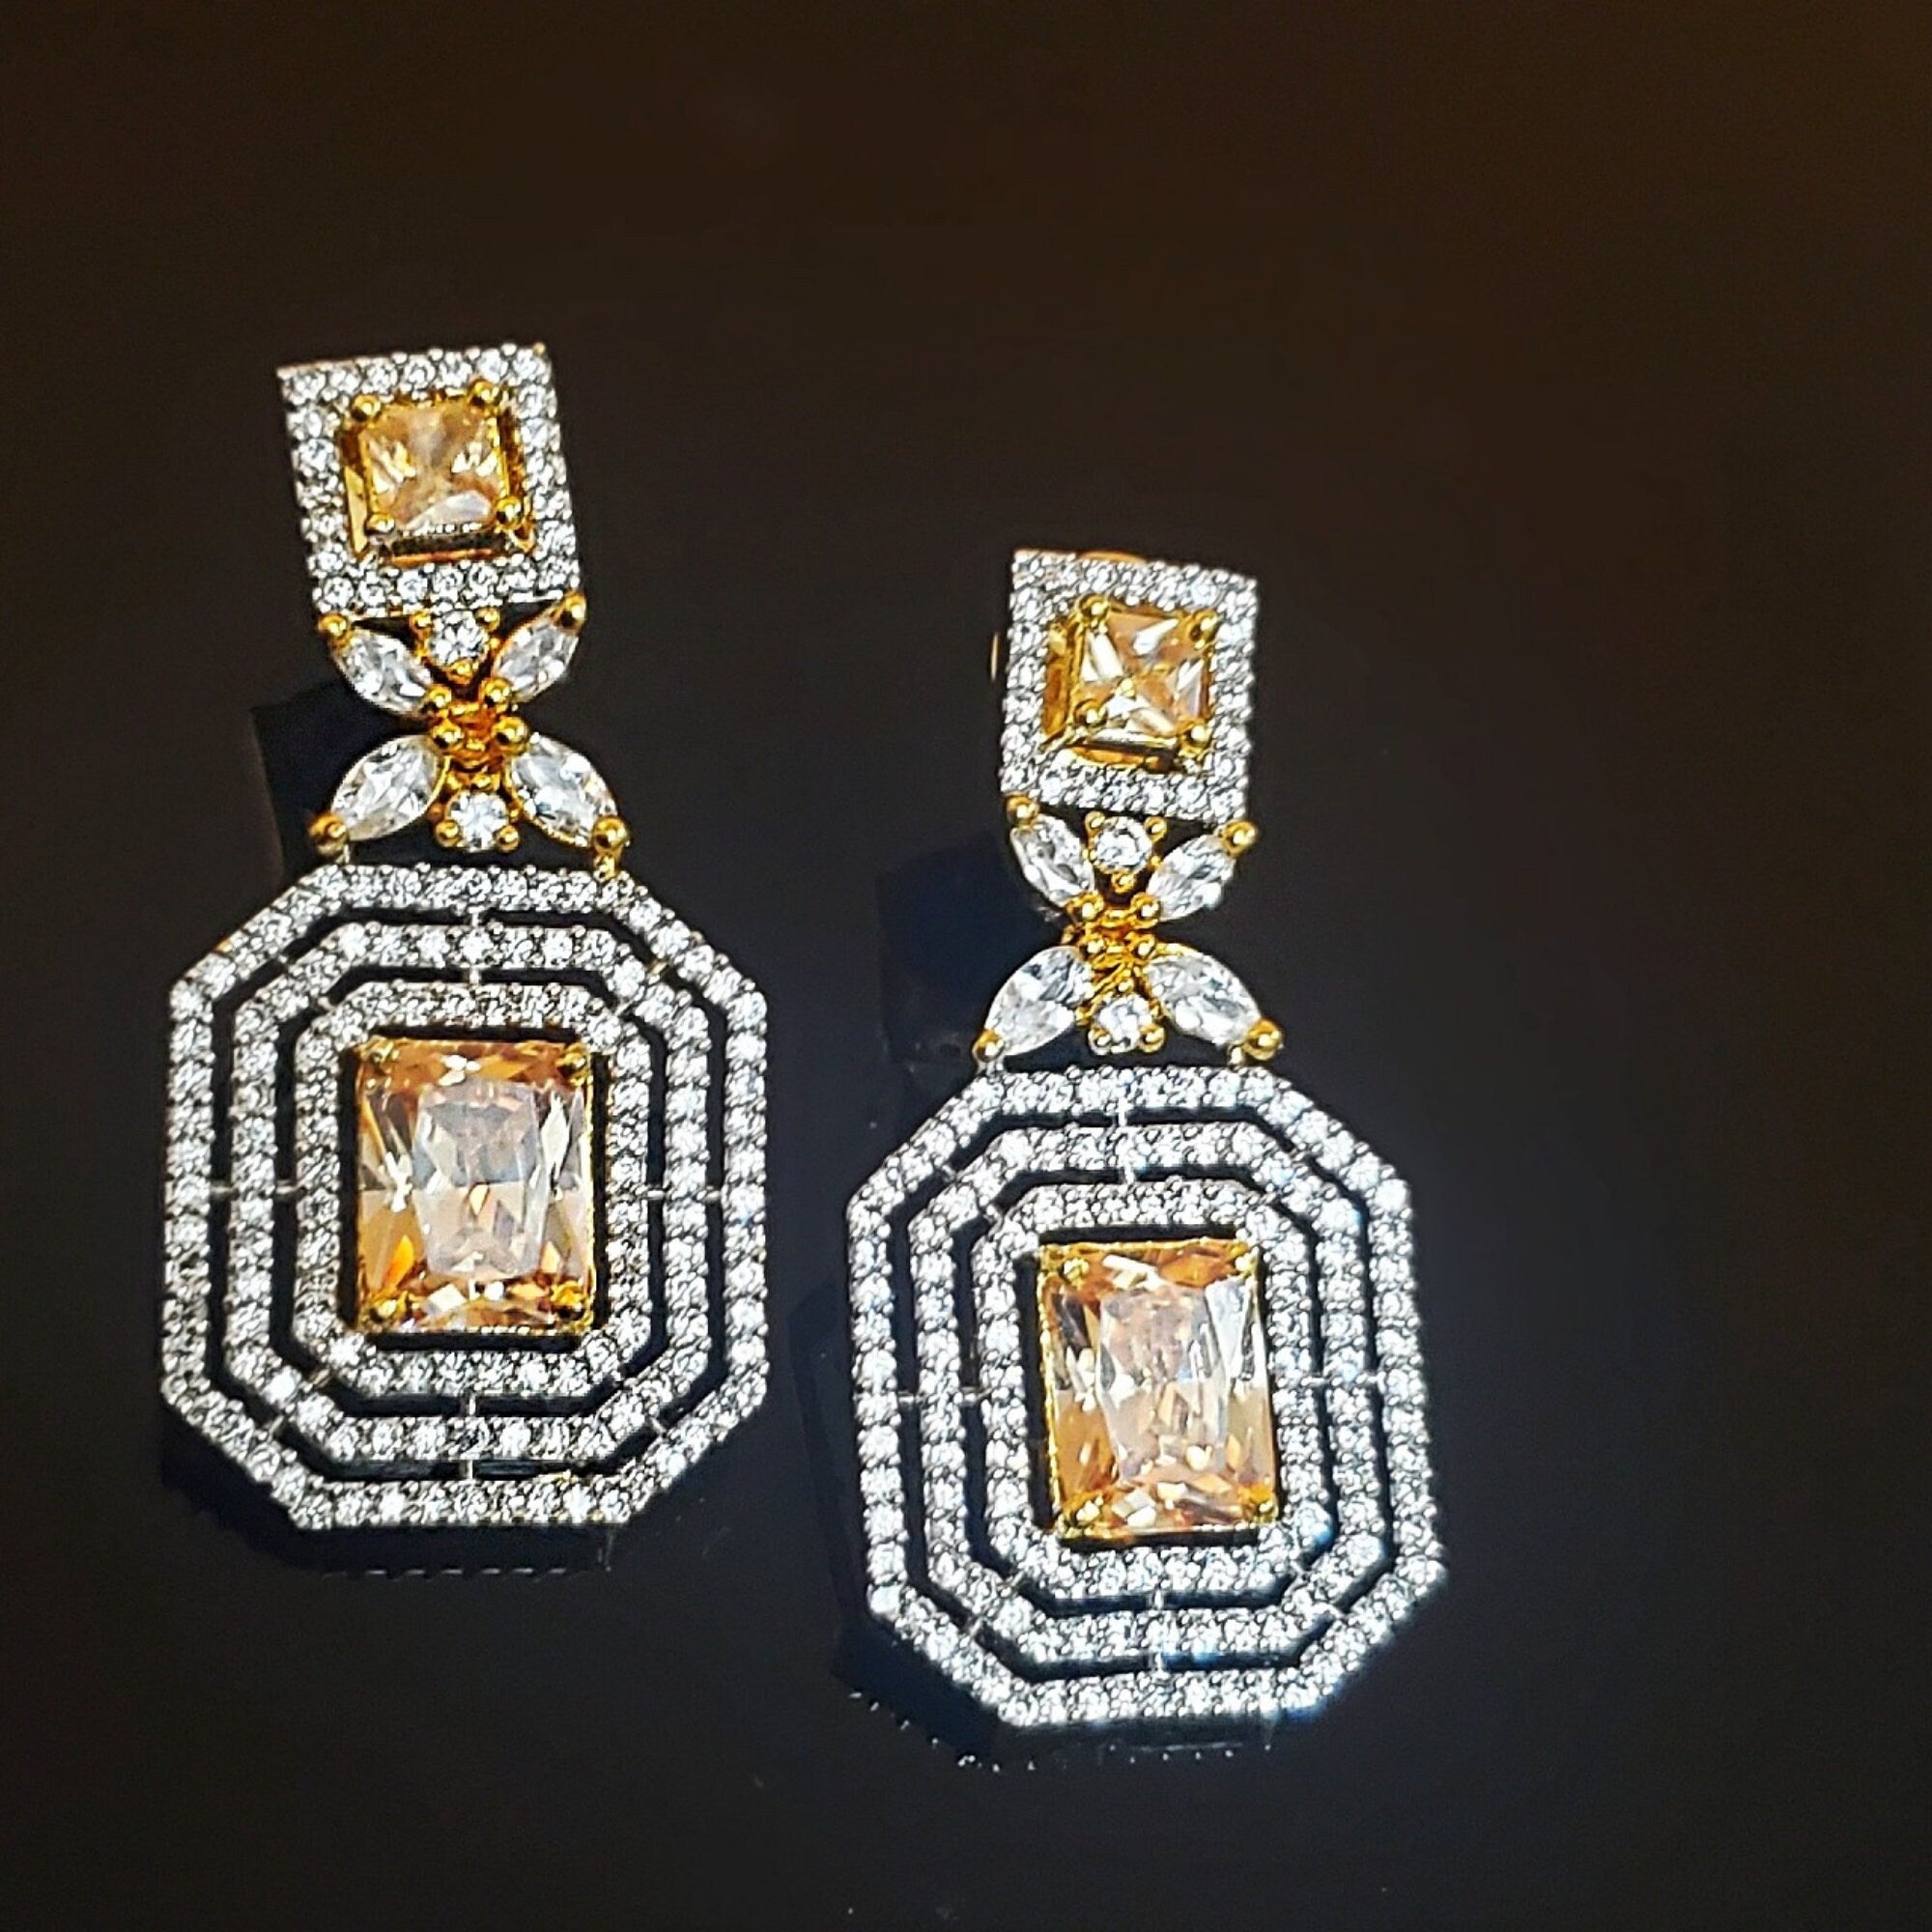 18K Emerald Cut White Yellow Gold Plated Citrine Pave Illusion Stones Dangling Drop Earrings, Wedding Earrings, Runway, Couture